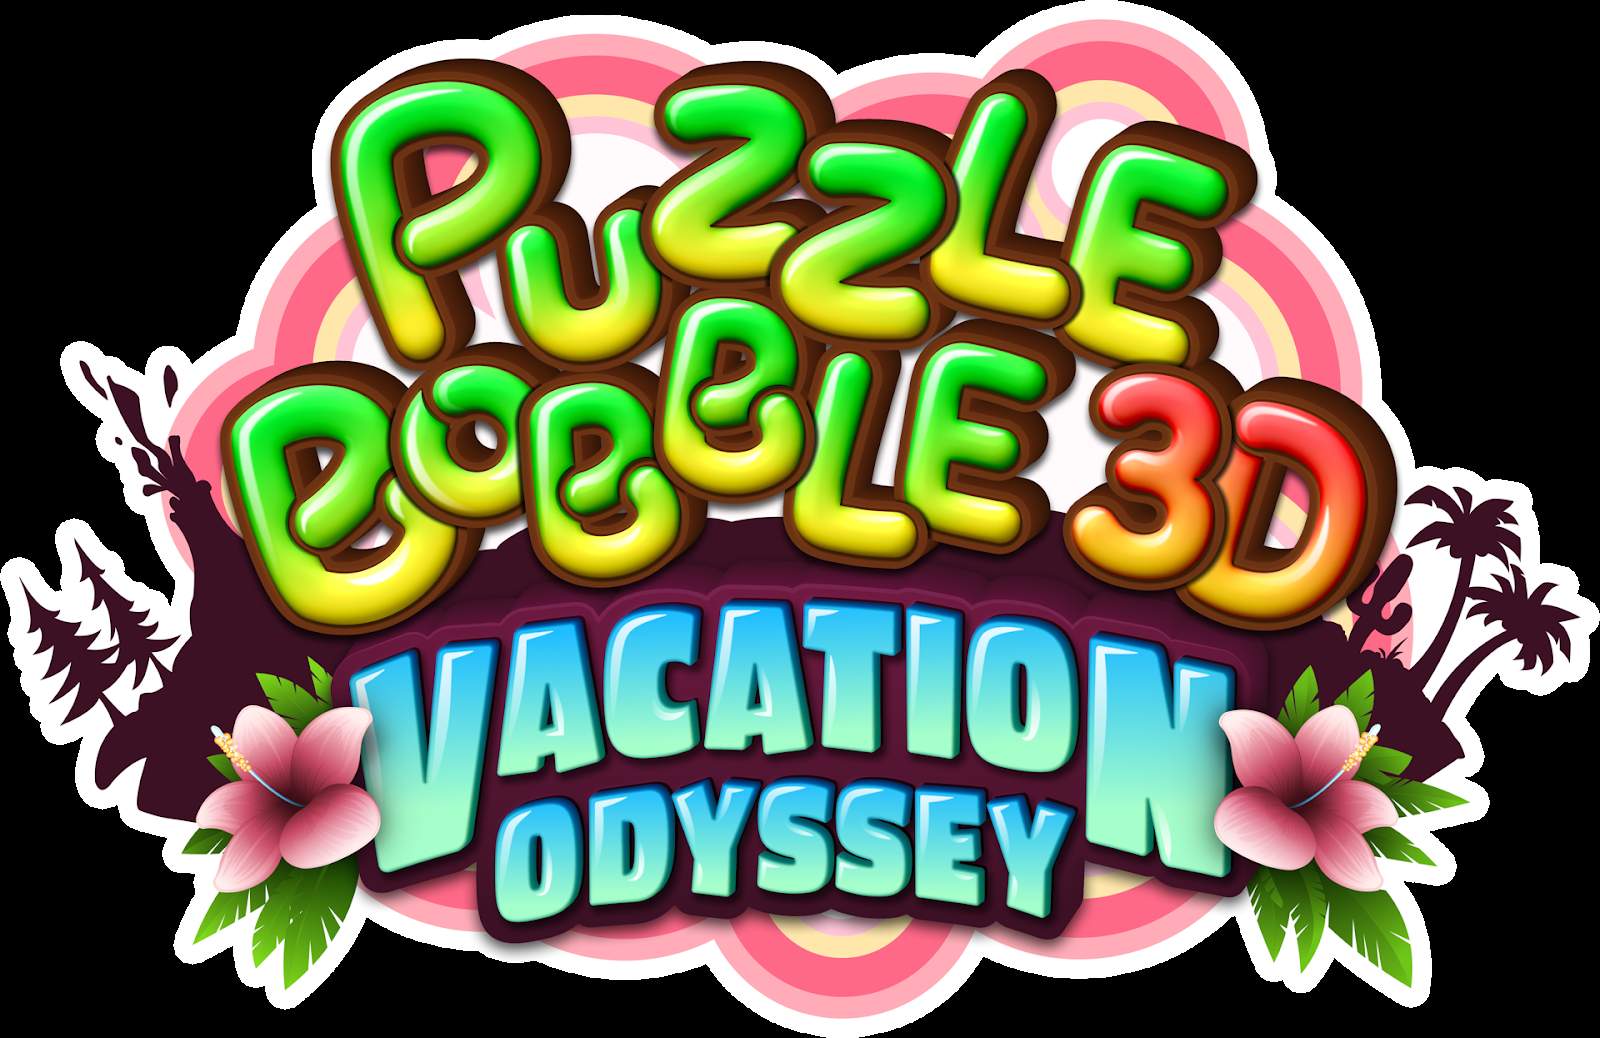 Puzzle Bobble D: Vacation Odyssey